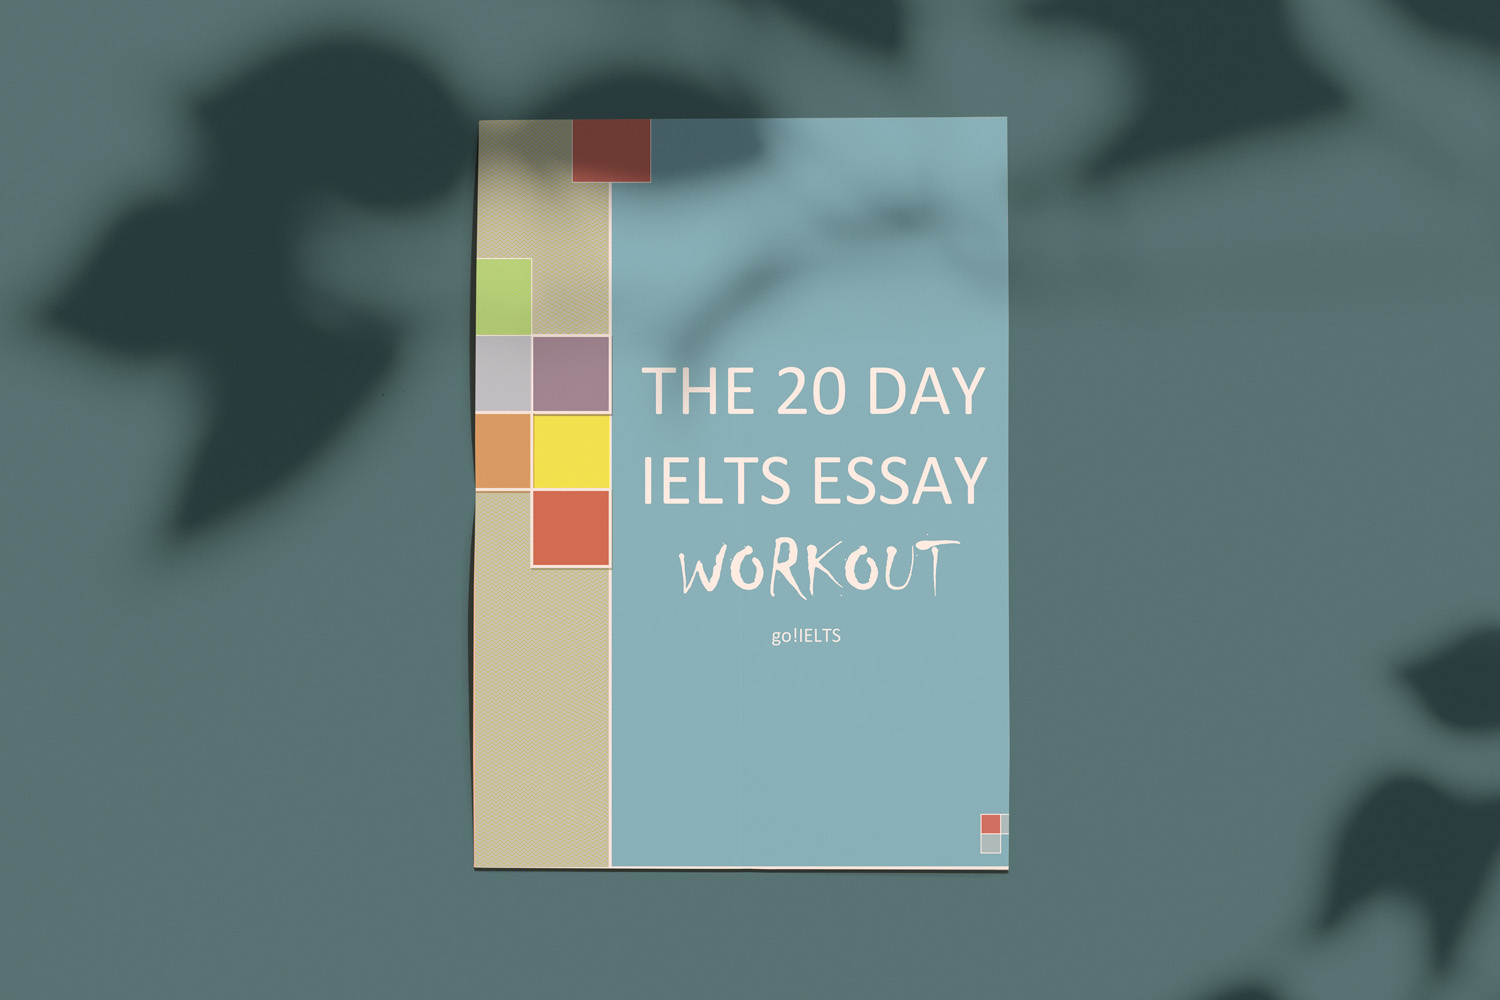 The 20 Day Ielts Essay Workout